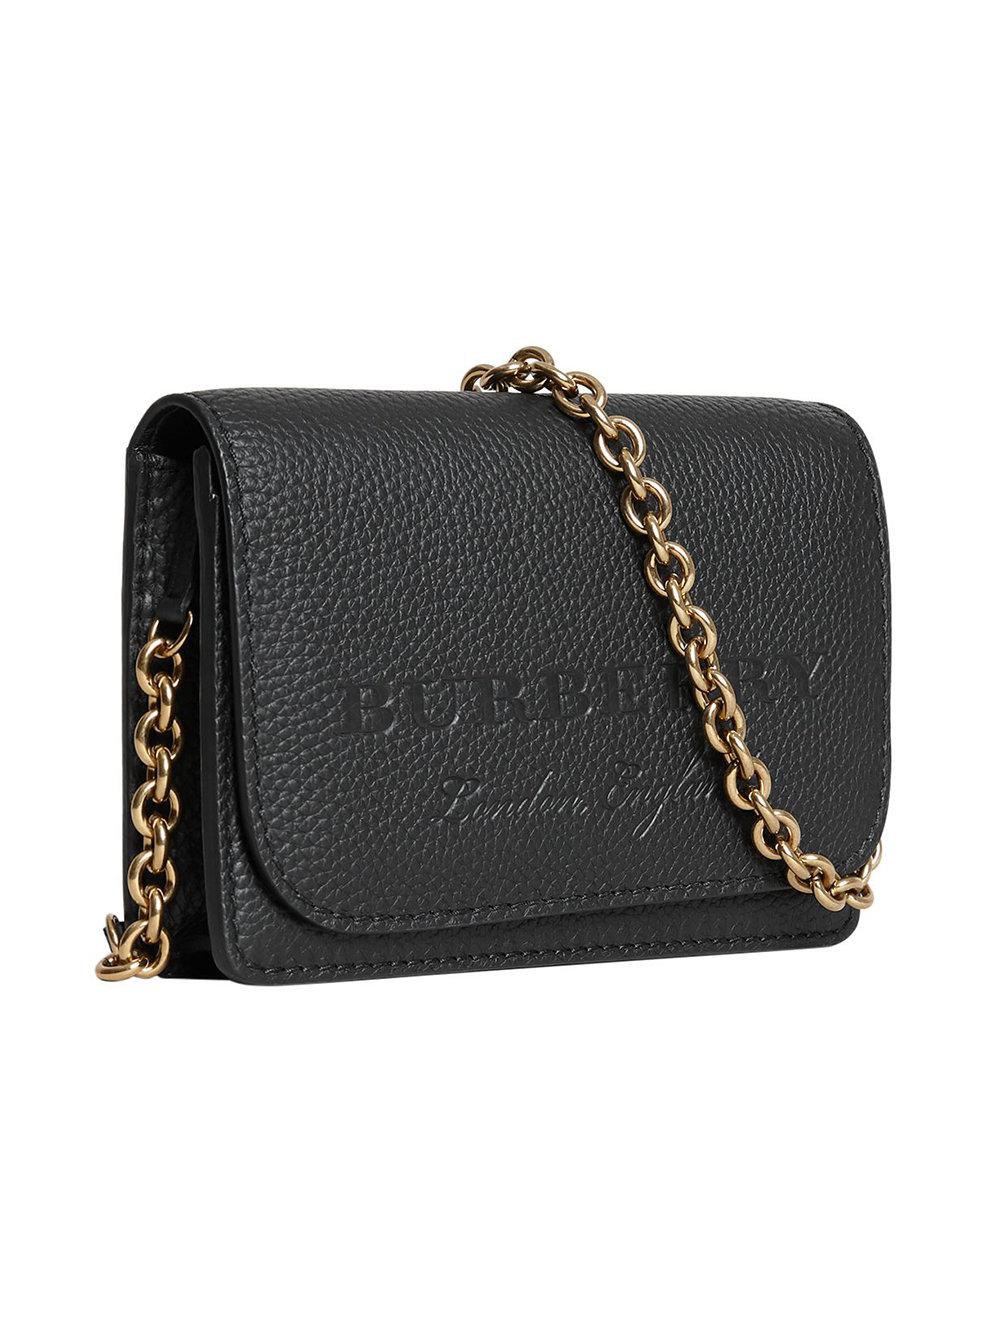 burberry embossed leather wallet with chain